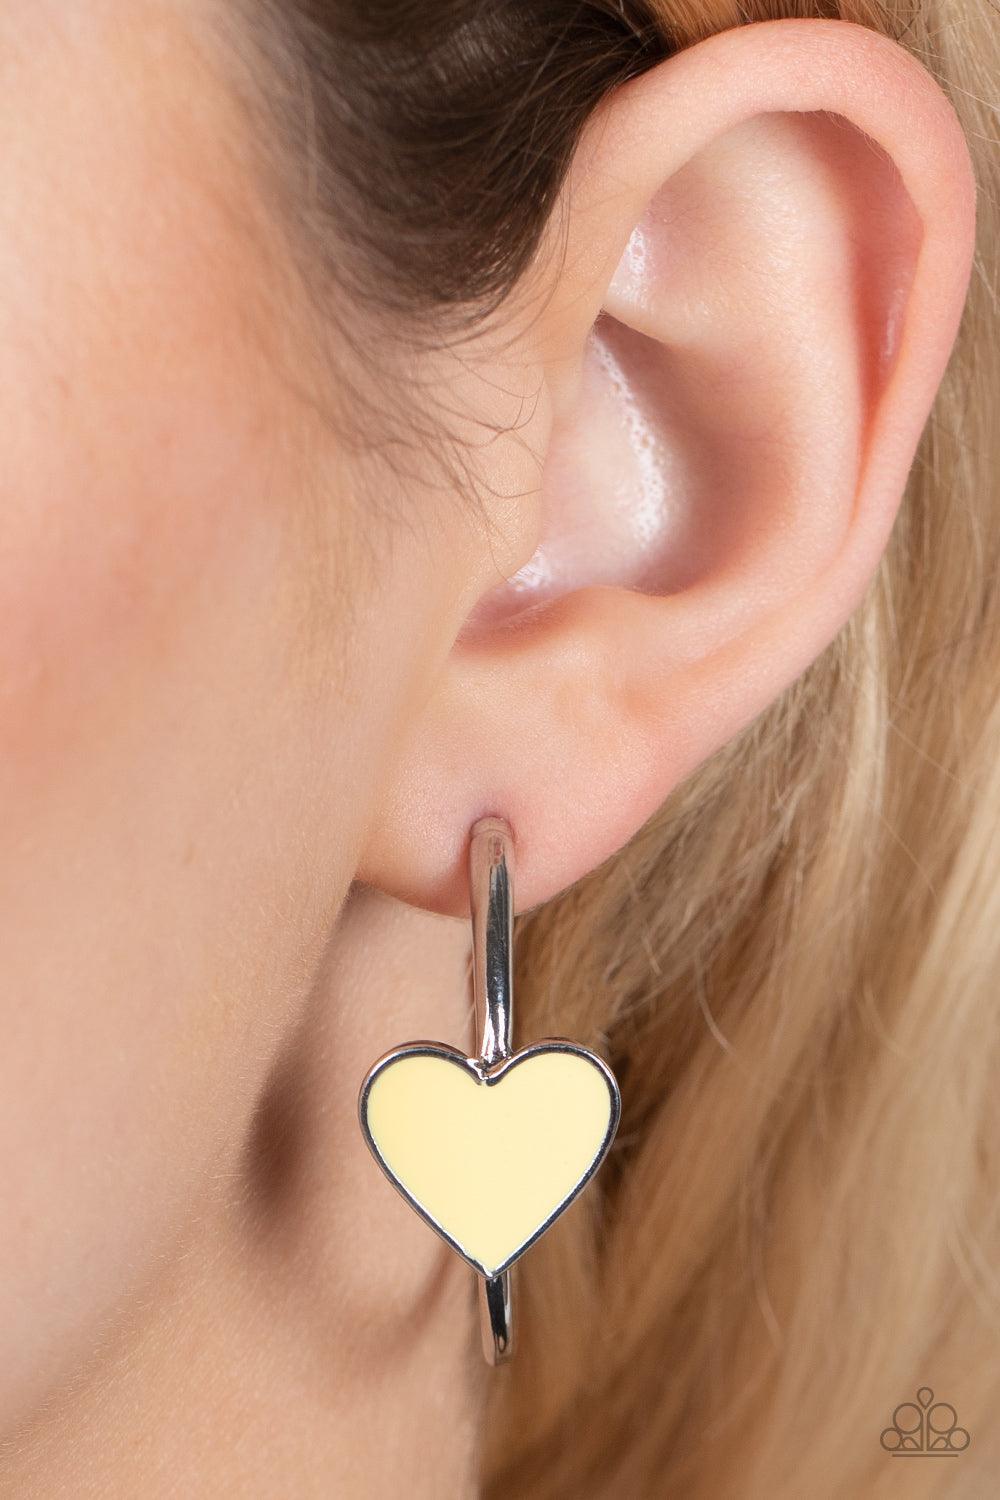 Paparazzi Accessories Kiss Up - Yellow A charming Illuminating heart adorns the front of a classic silver hoop resulting in a whimsical fashion. Earring attaches to a standard post fitting. Hoop measures approximately 1 1/4" in diameter. Sold as one pair